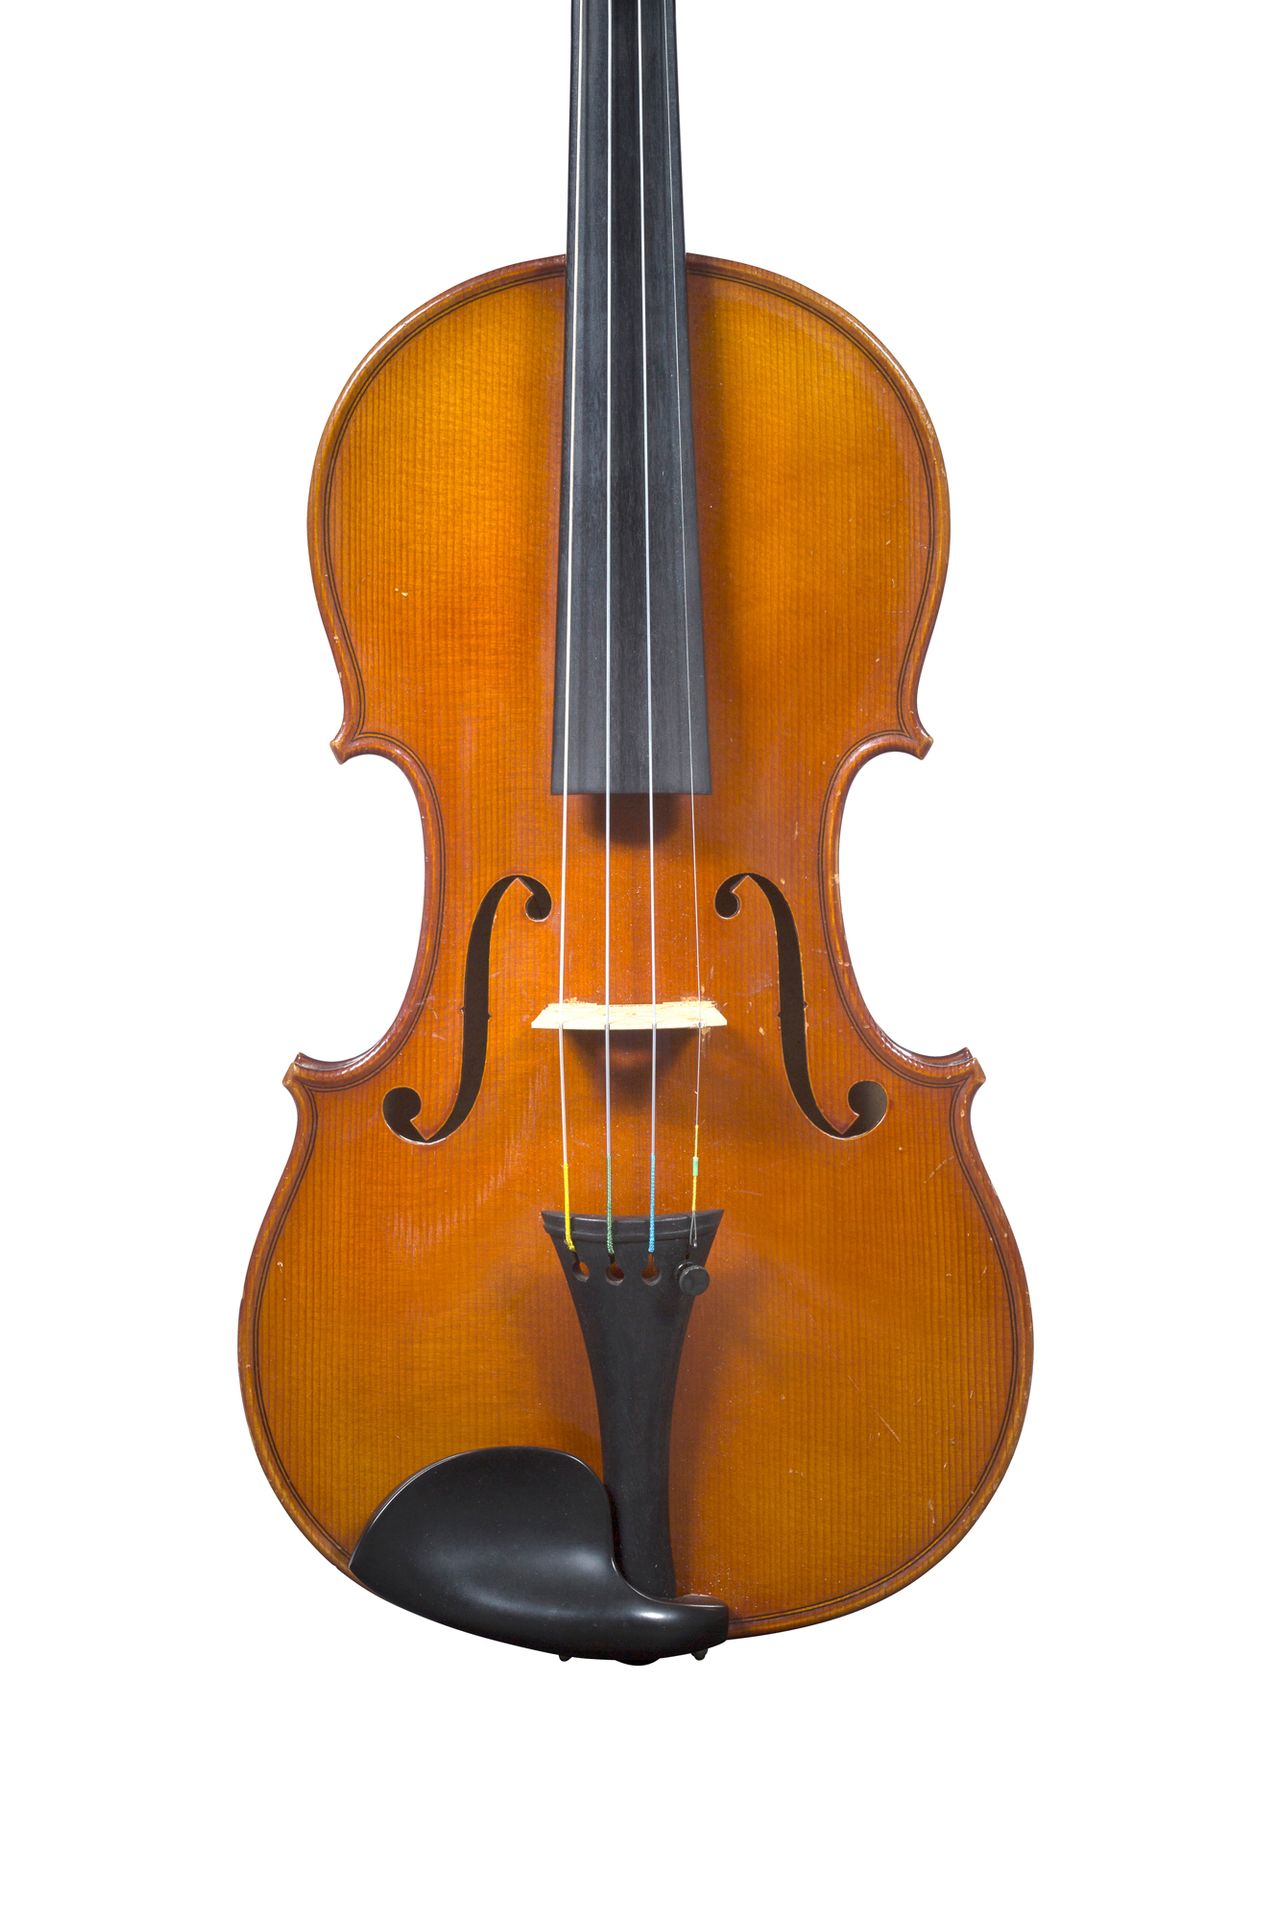 Null A French Violin by Gustave Villaume, Nancy 1927